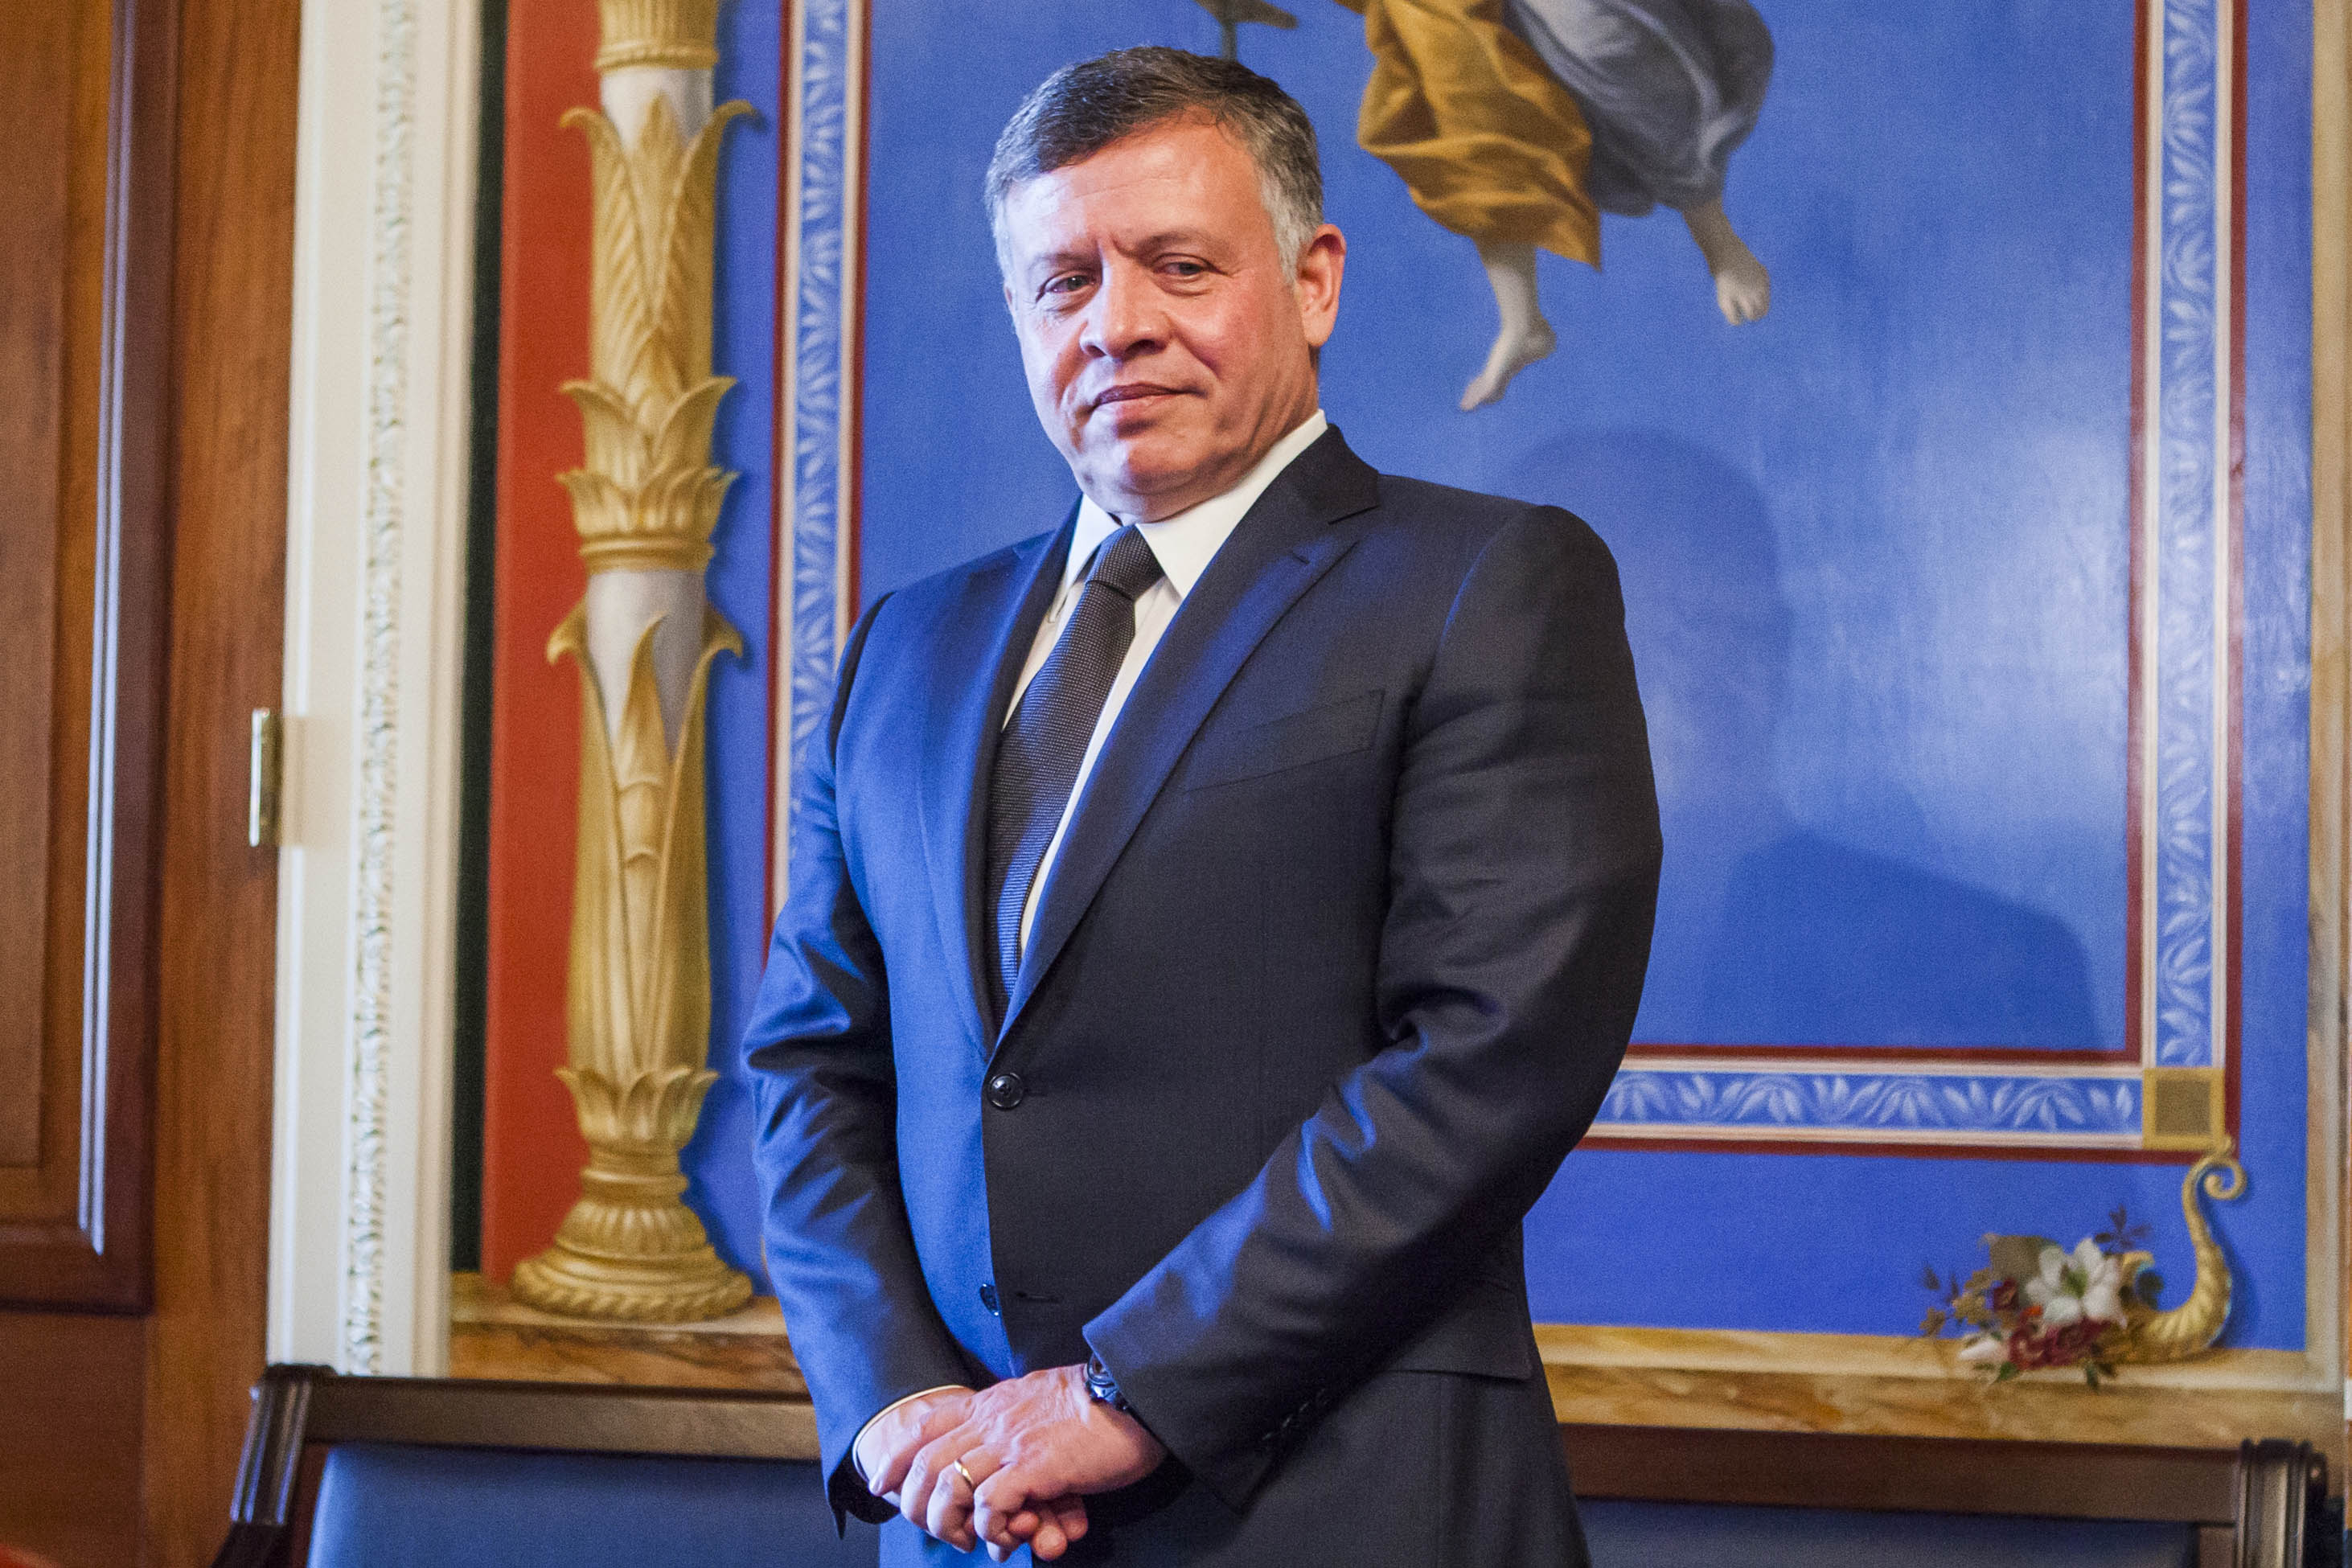 King Abdullah II of Jordan meets with members of the US Senate Appropriations Committee at the U.S. Captiol in Washington on Feb. 03, 2015.